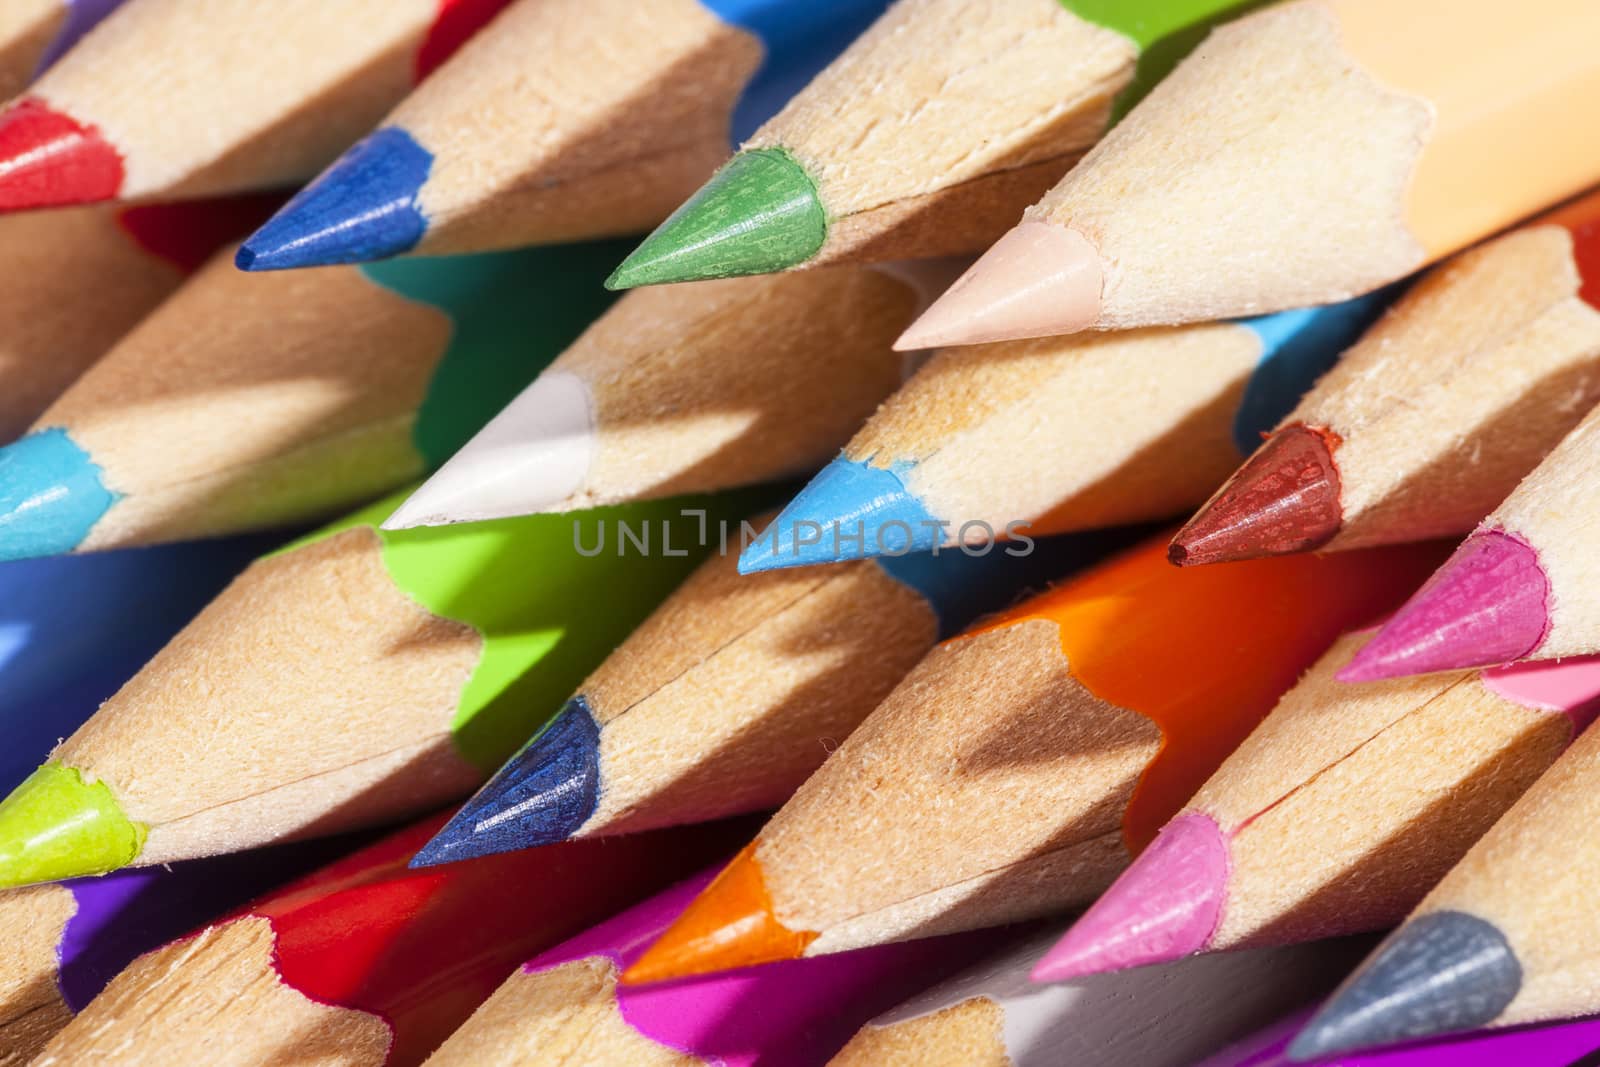  Background of chipped colored crayons, close up